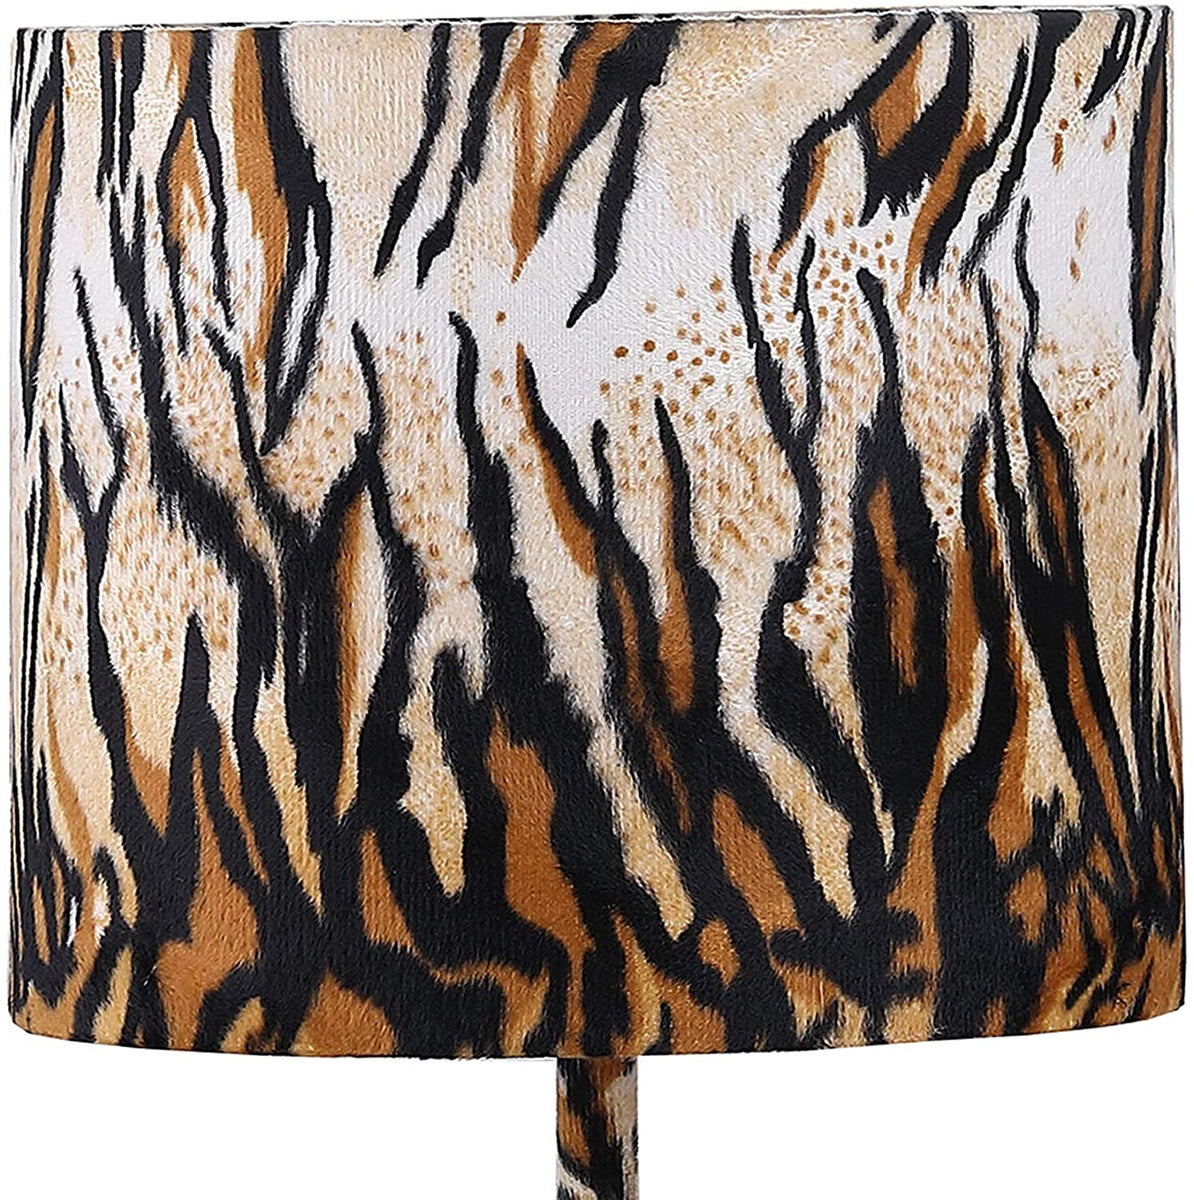 Fabric Wrapped Table Lamp with Striped Animal Print, Brown, Black